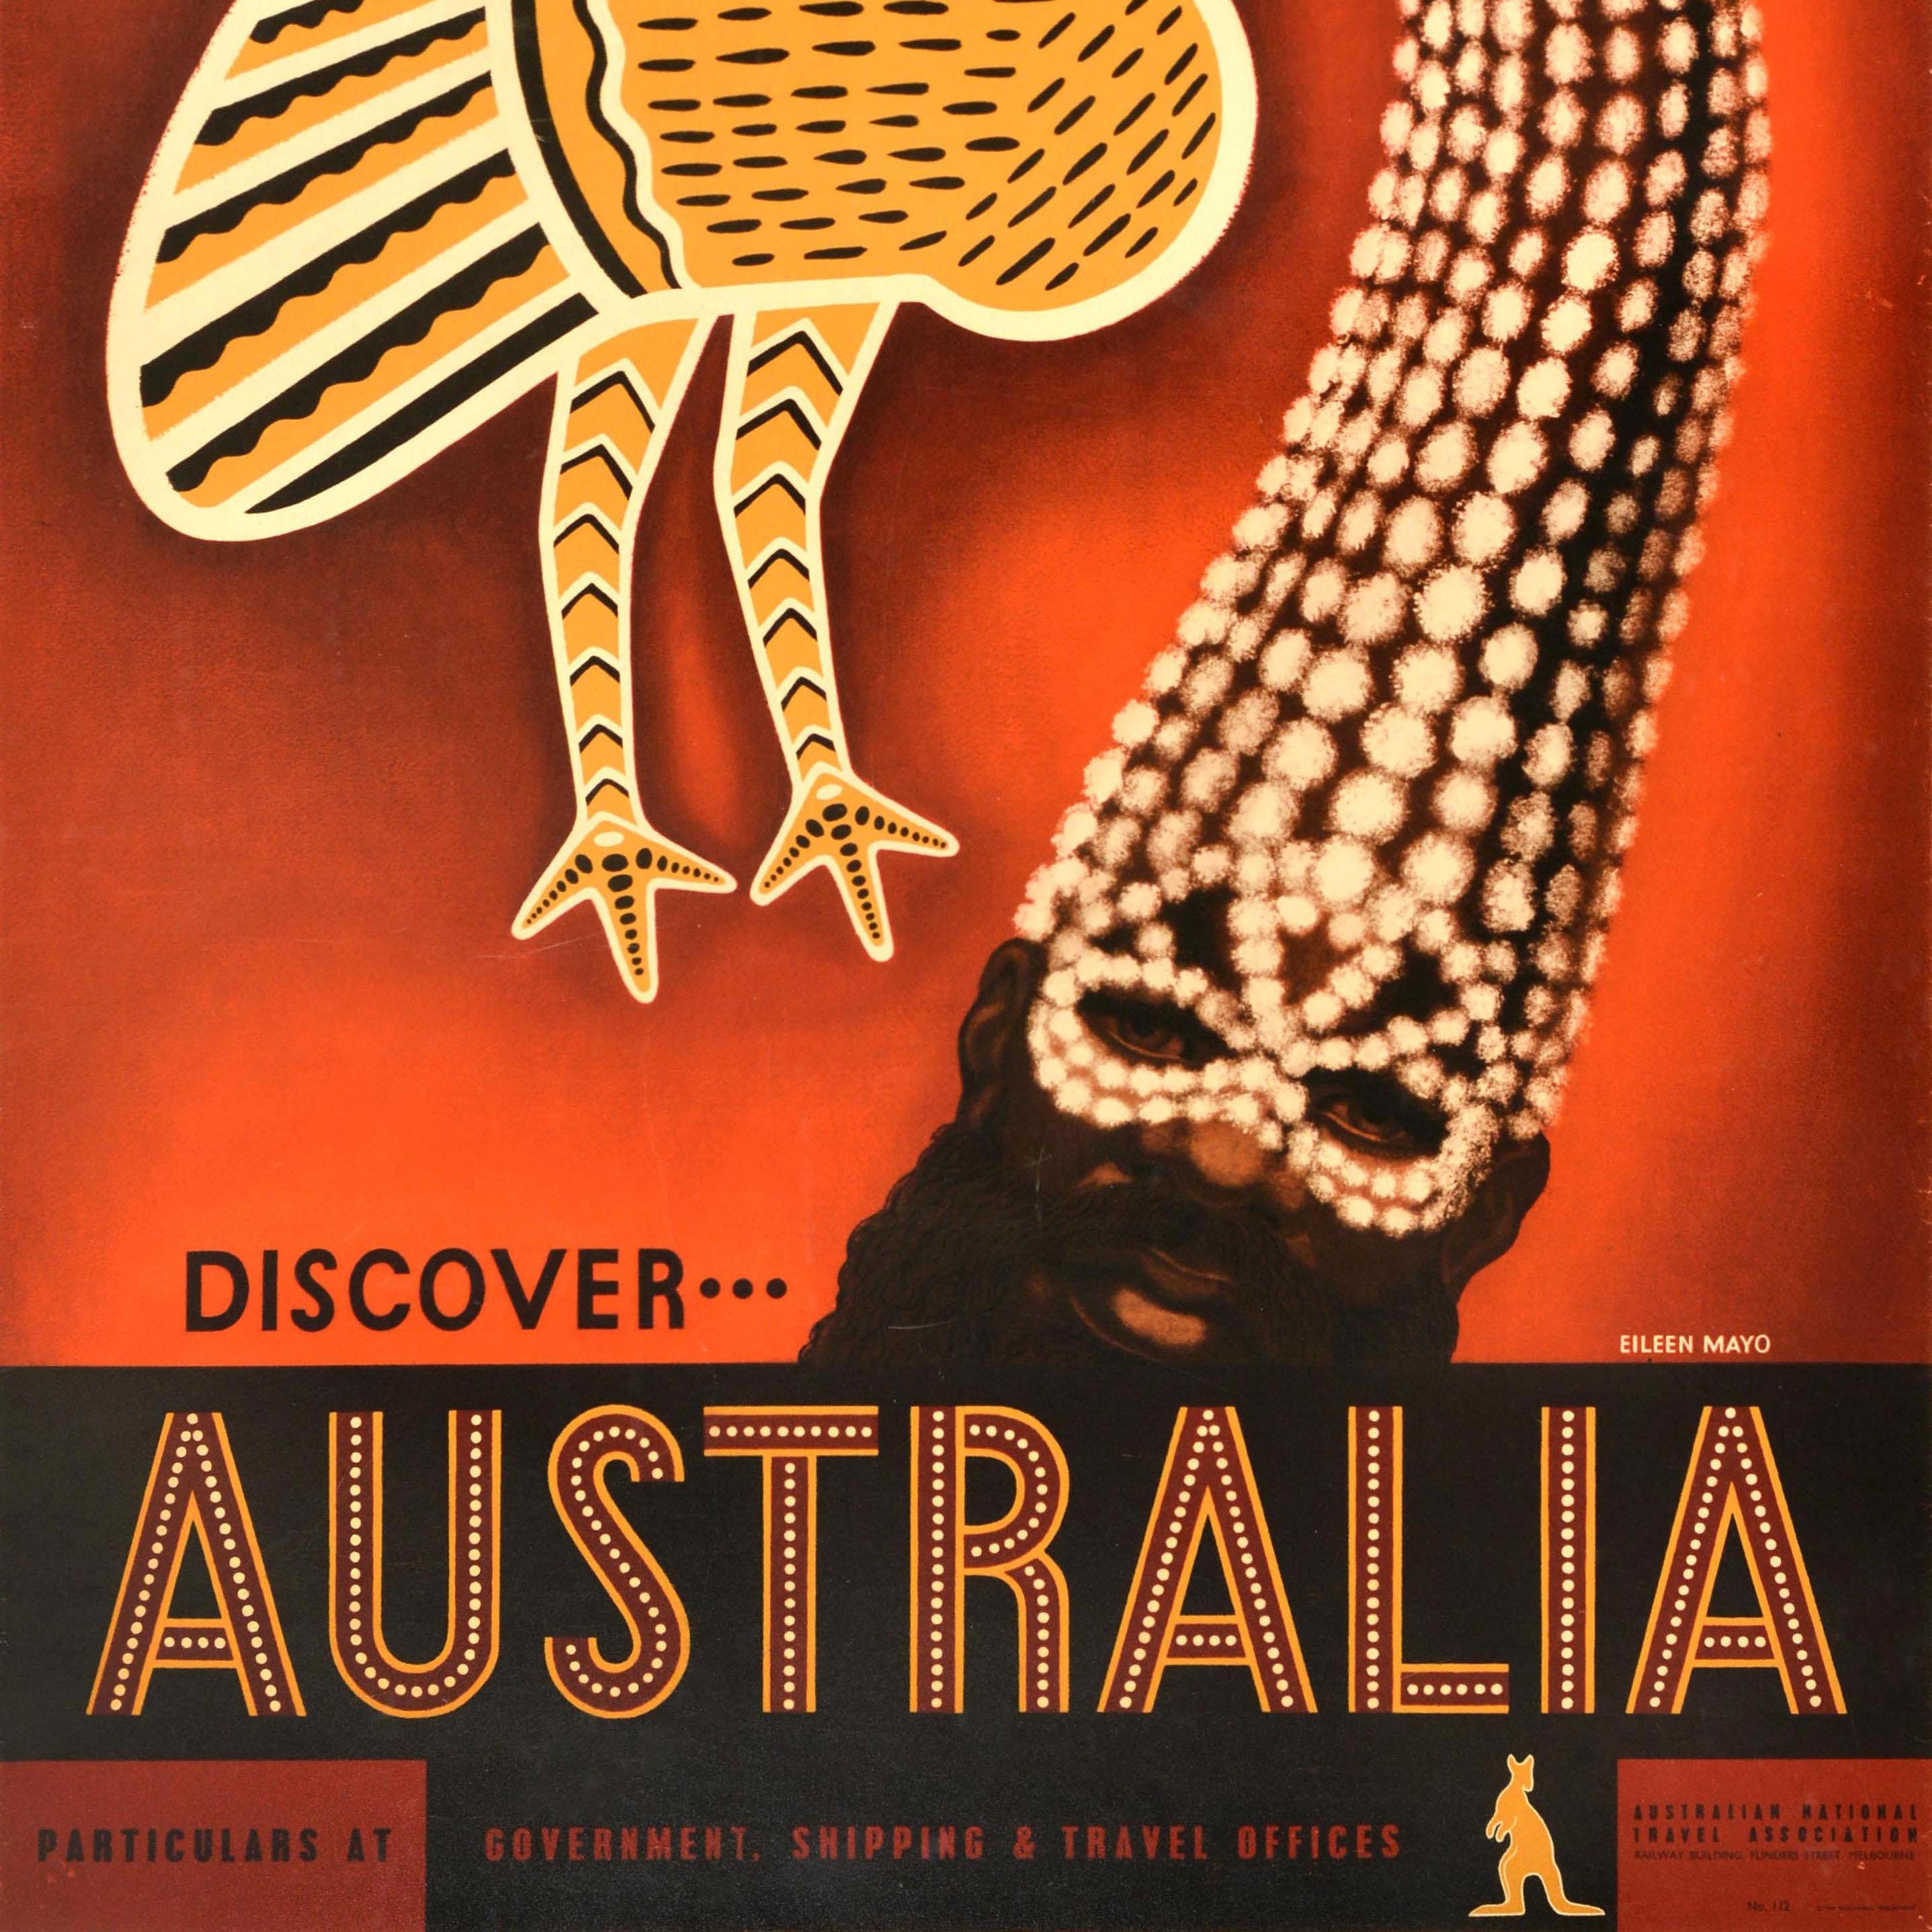 Original Vintage Travel Advertising Poster Discover Australia Emu Eileen Mayo In Good Condition For Sale In London, GB